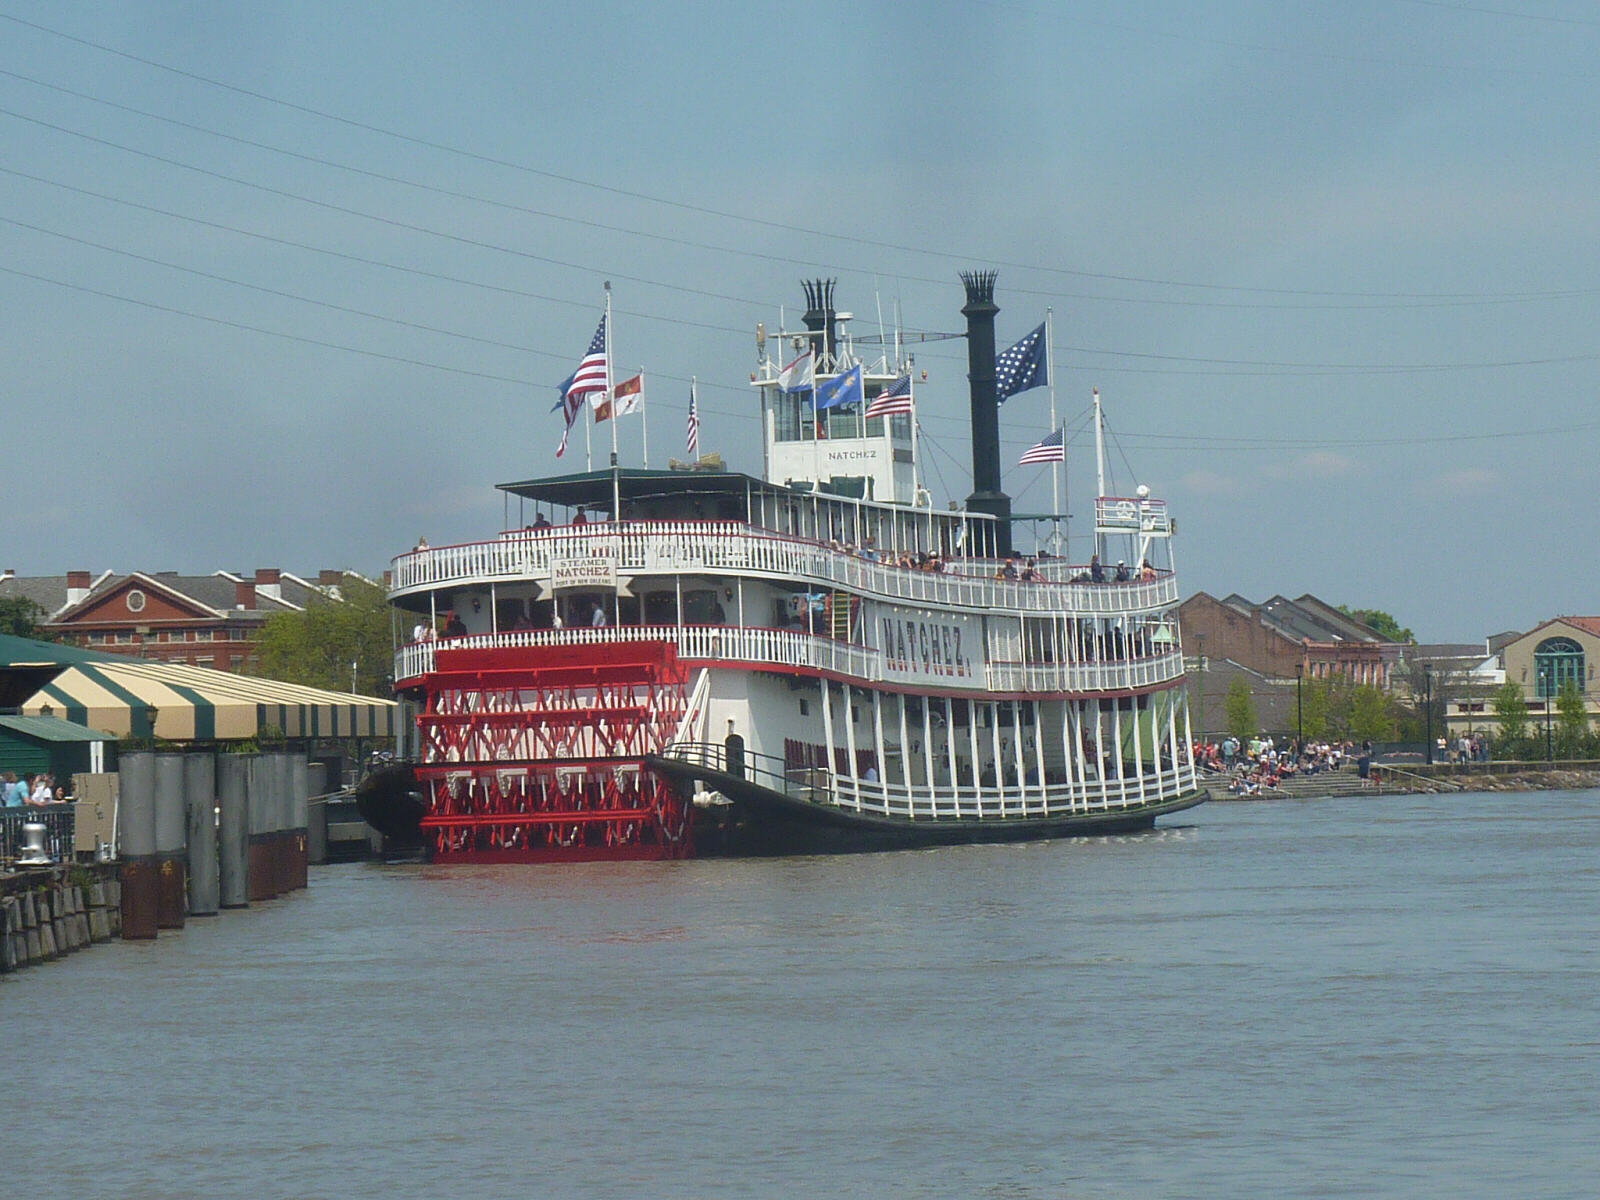 The Natchez paddle steamer at New Orleans